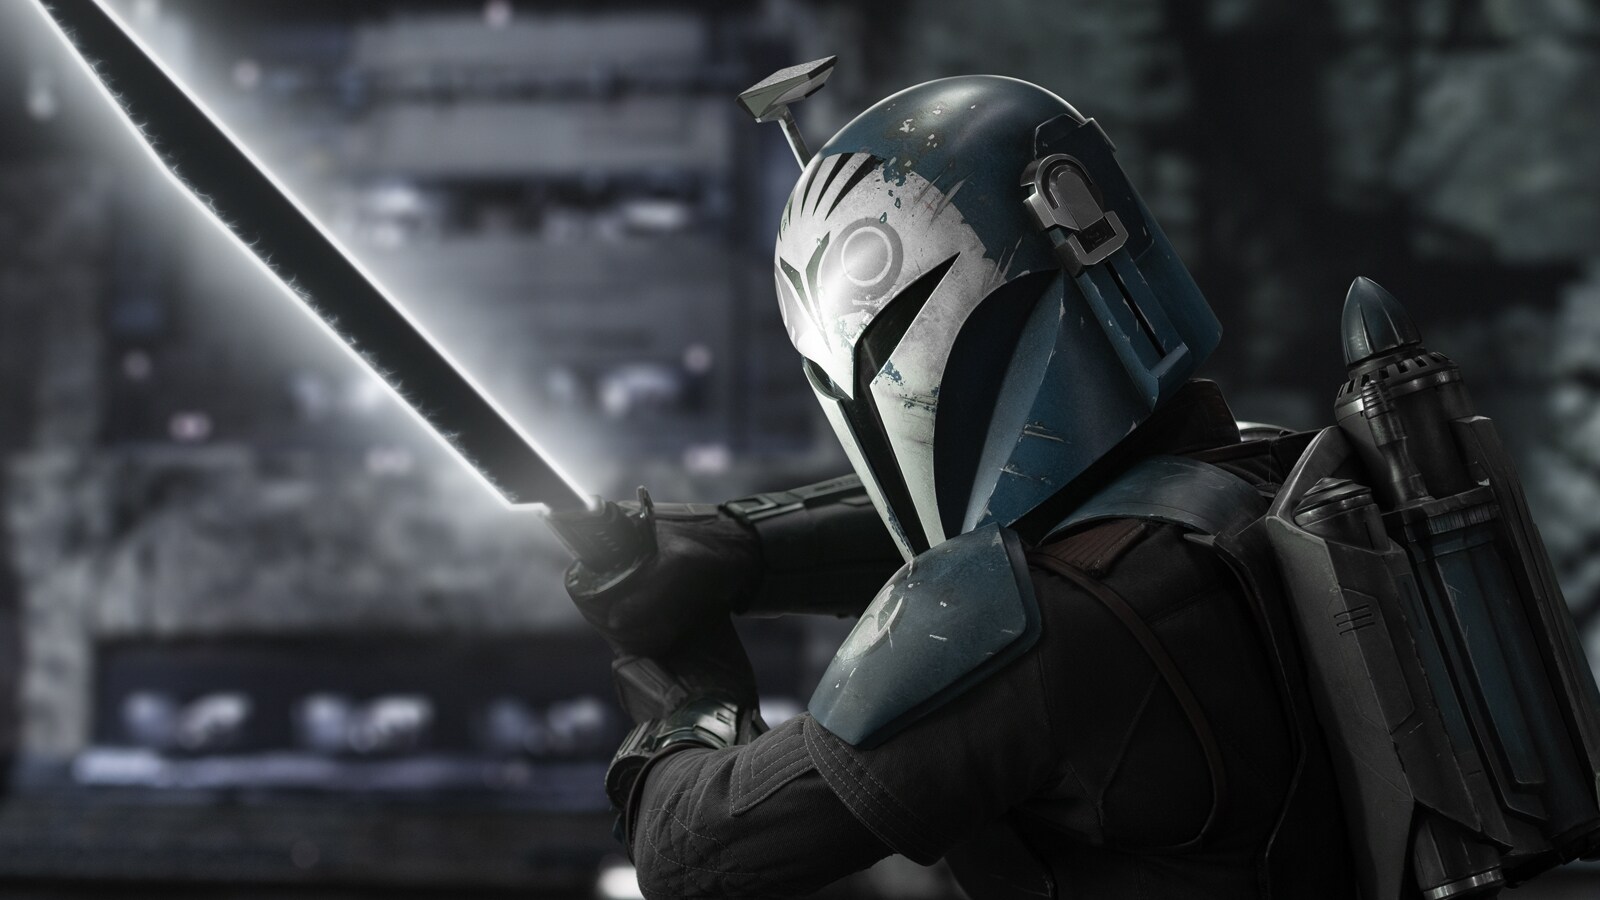 IGN - The Mandalorian suffers the same lighting problems that plagued Game  of Thrones, blunting the impact of the return to Mandalore. Read our full  review on site.